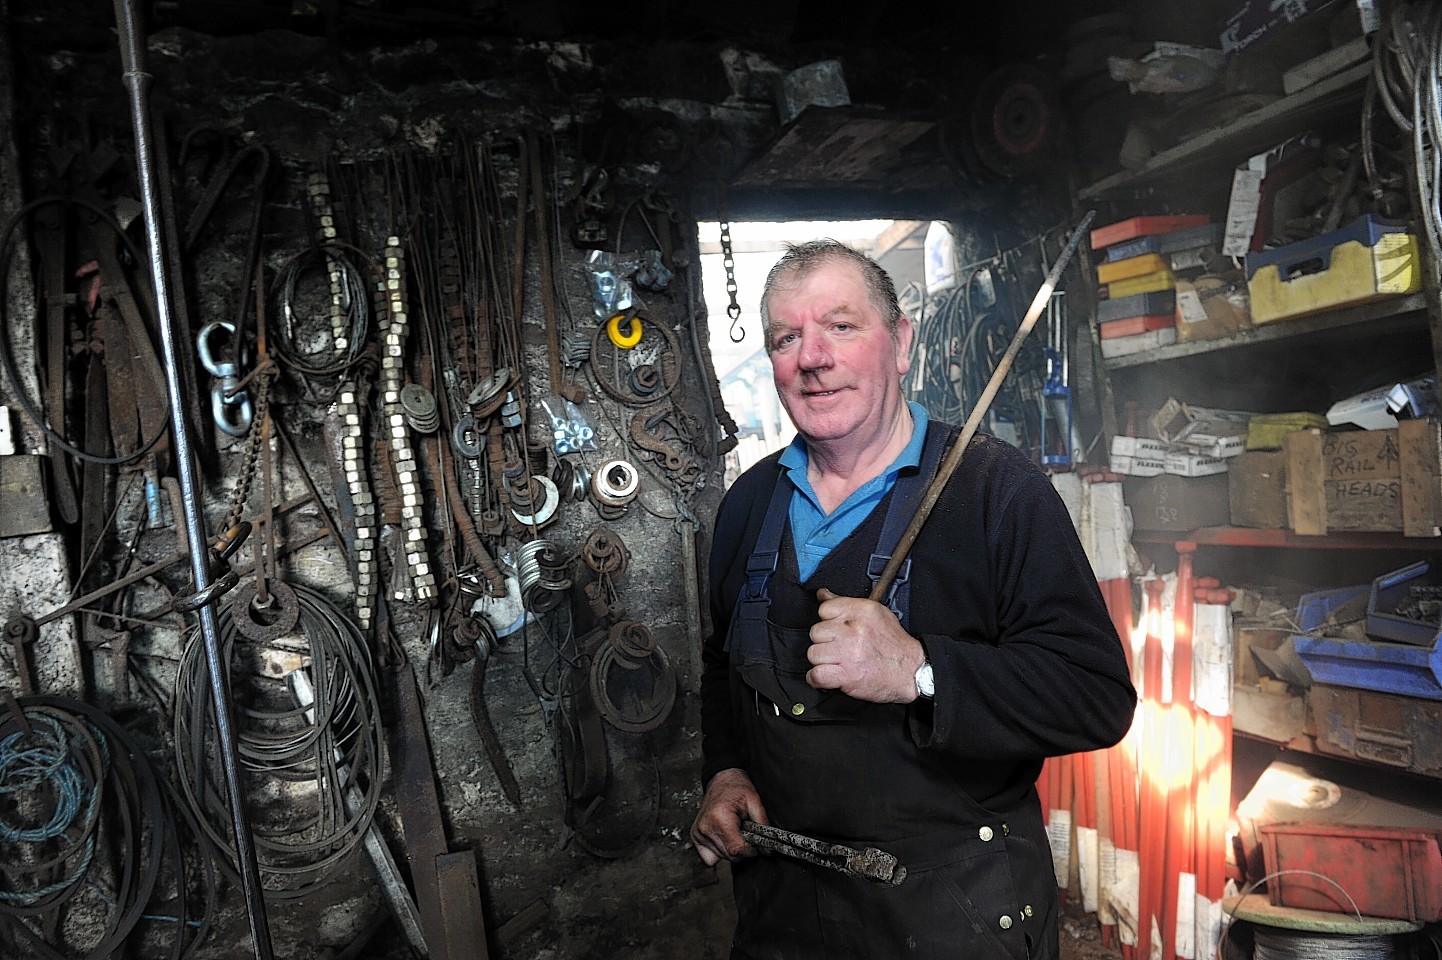 David Forsyth from St Combs who has been working as an agricultural engineer and blacksmith for 50 years.